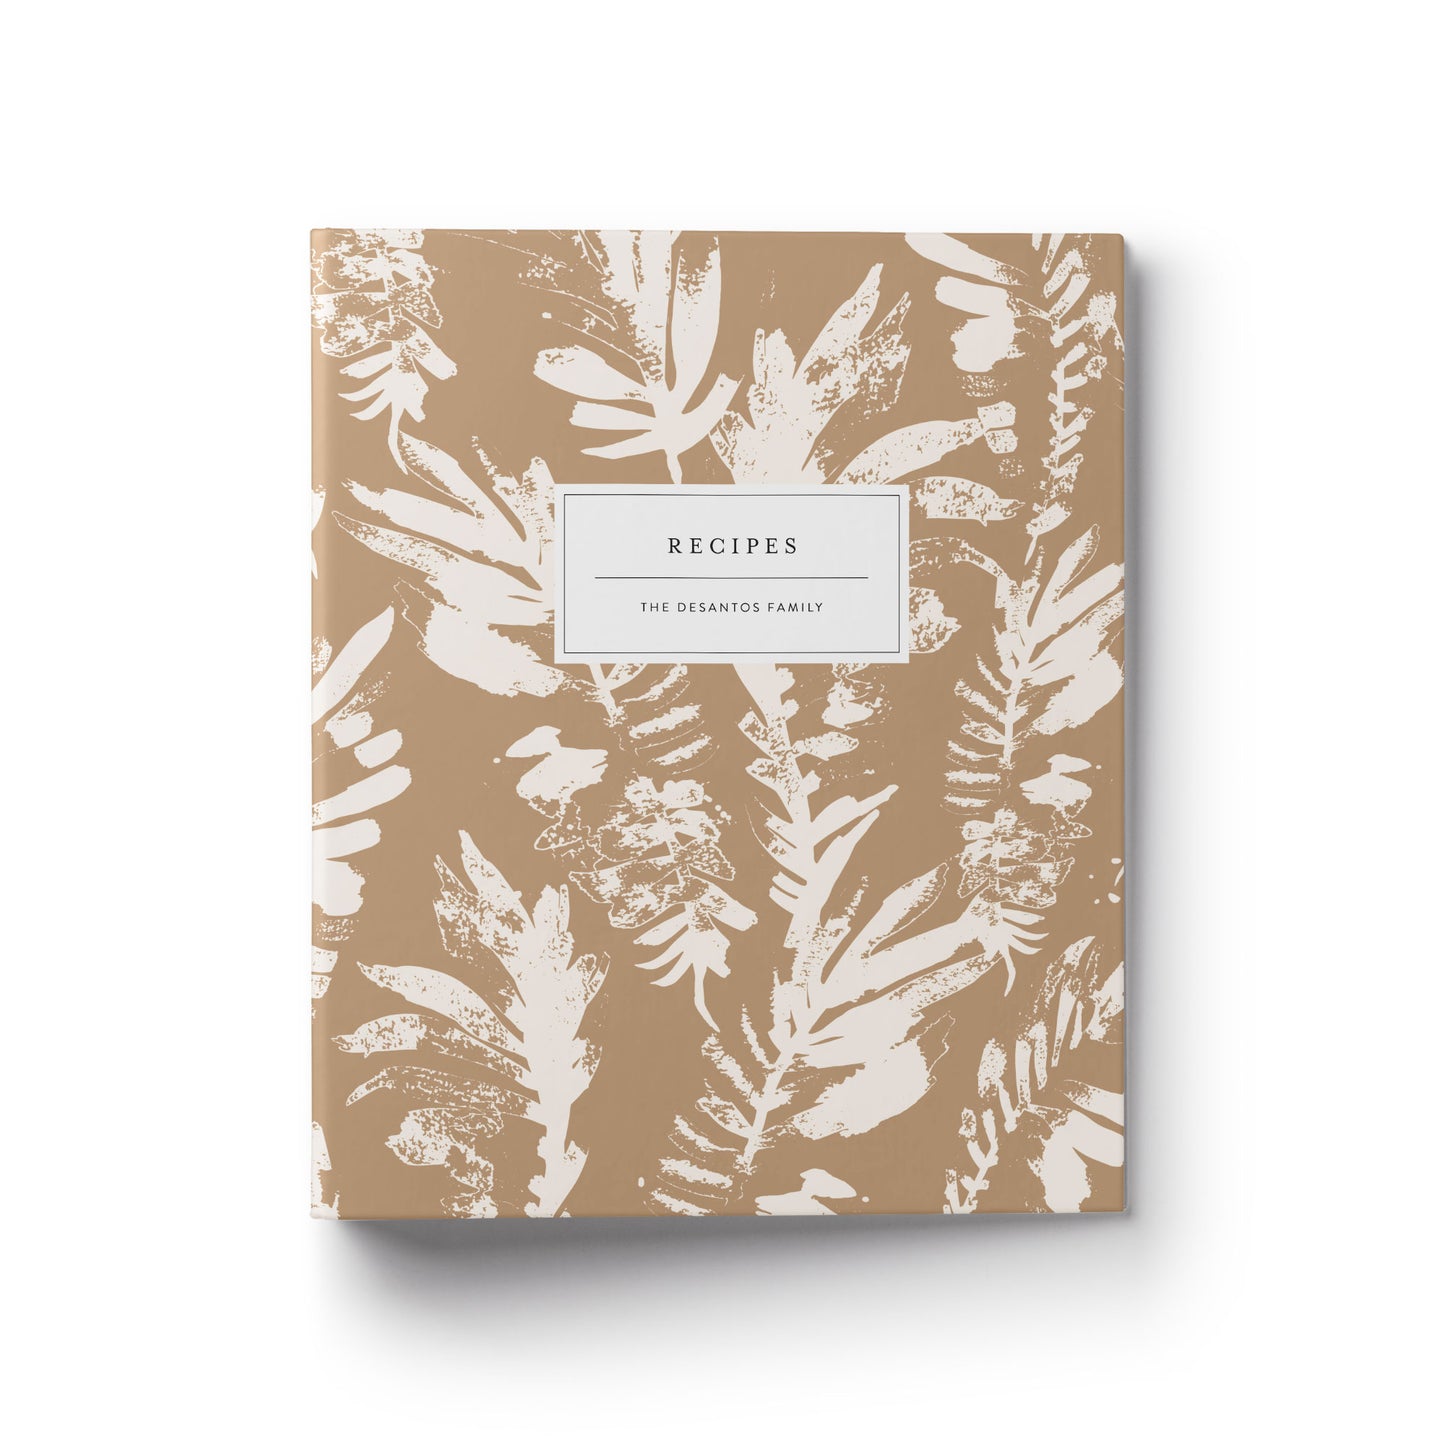 A custom recipe binder in a neutral boho leaf design makes the perfect gift for any occasion